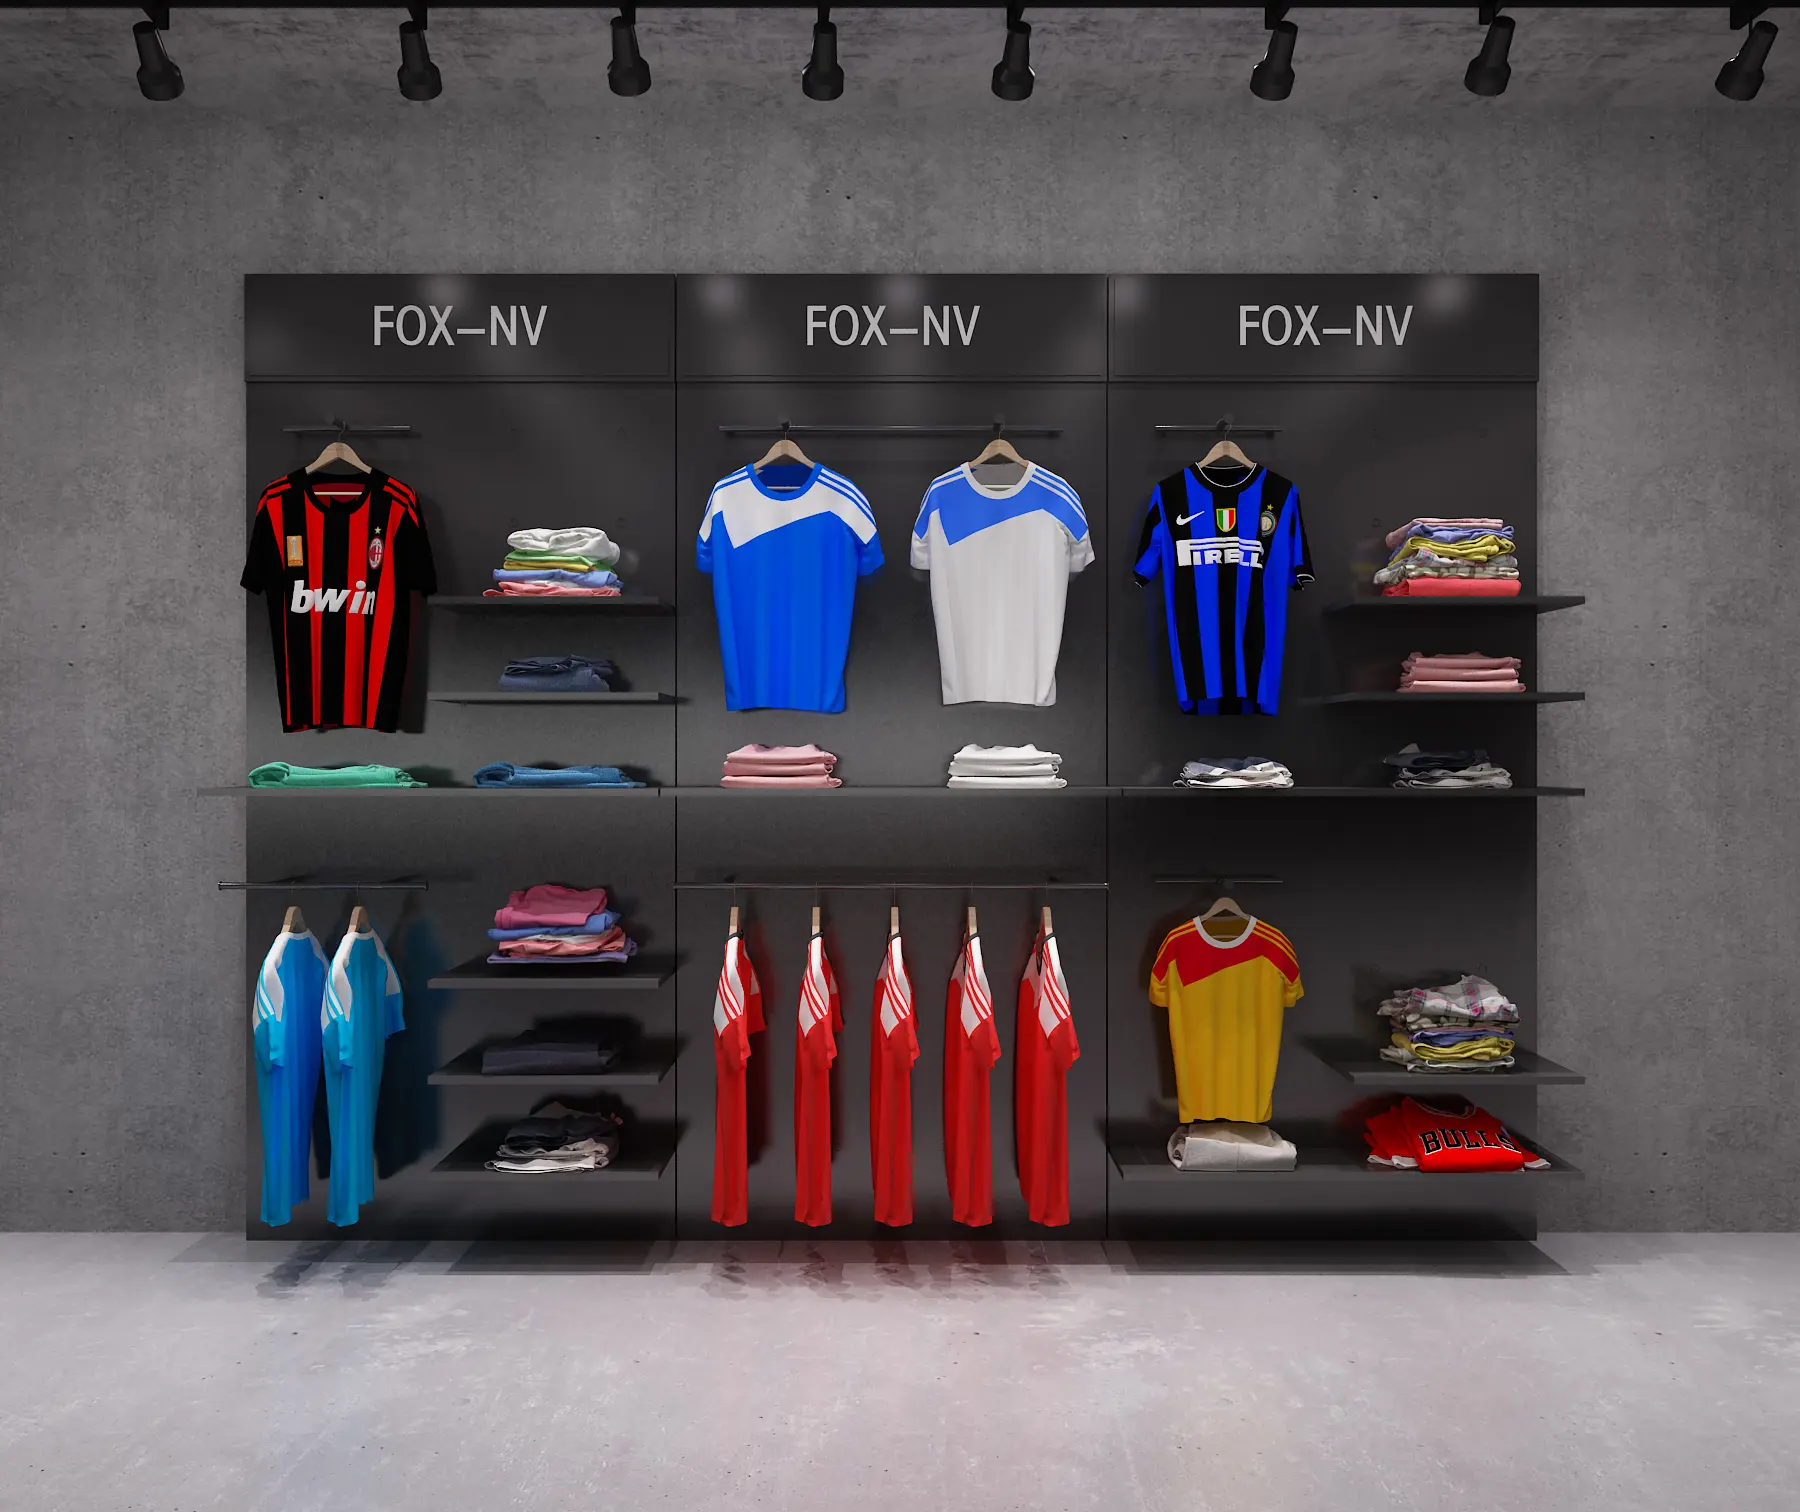 Wholesale Men Sportswear Clothes Shop Interior Design Custom black Store Fixtures Sport Clothing Display Rack for Clothing Store